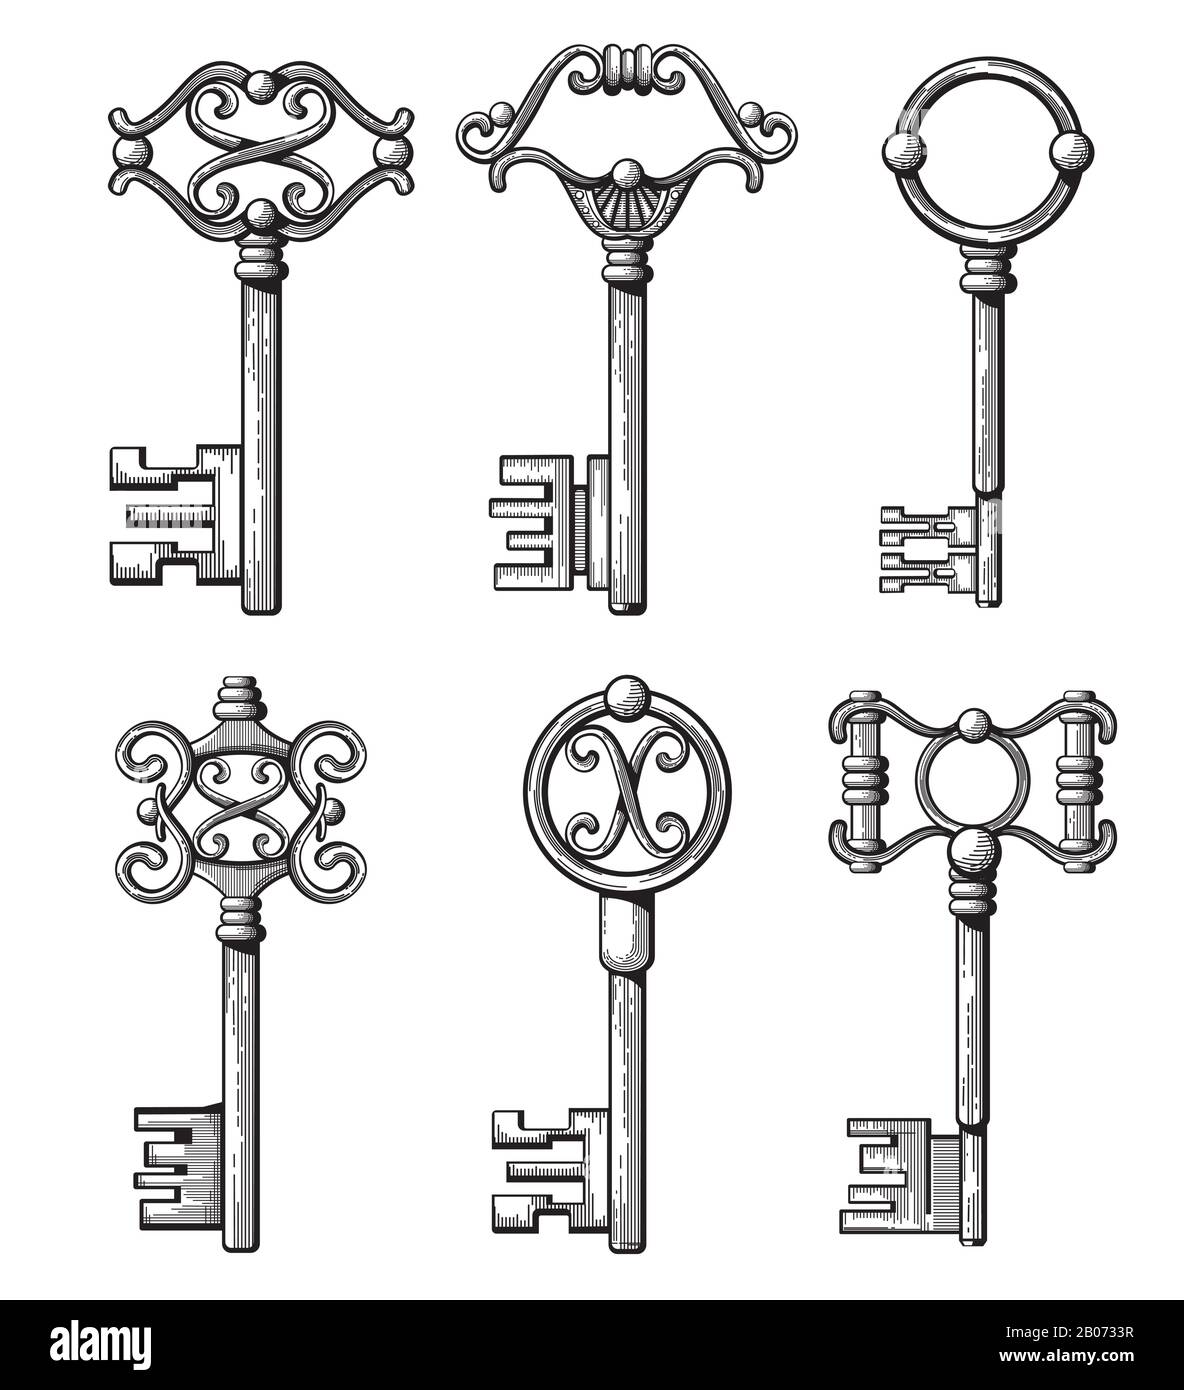 Vintage medieval keys, antique chaves vector illustration. Filigree key for access and open door Stock Vector